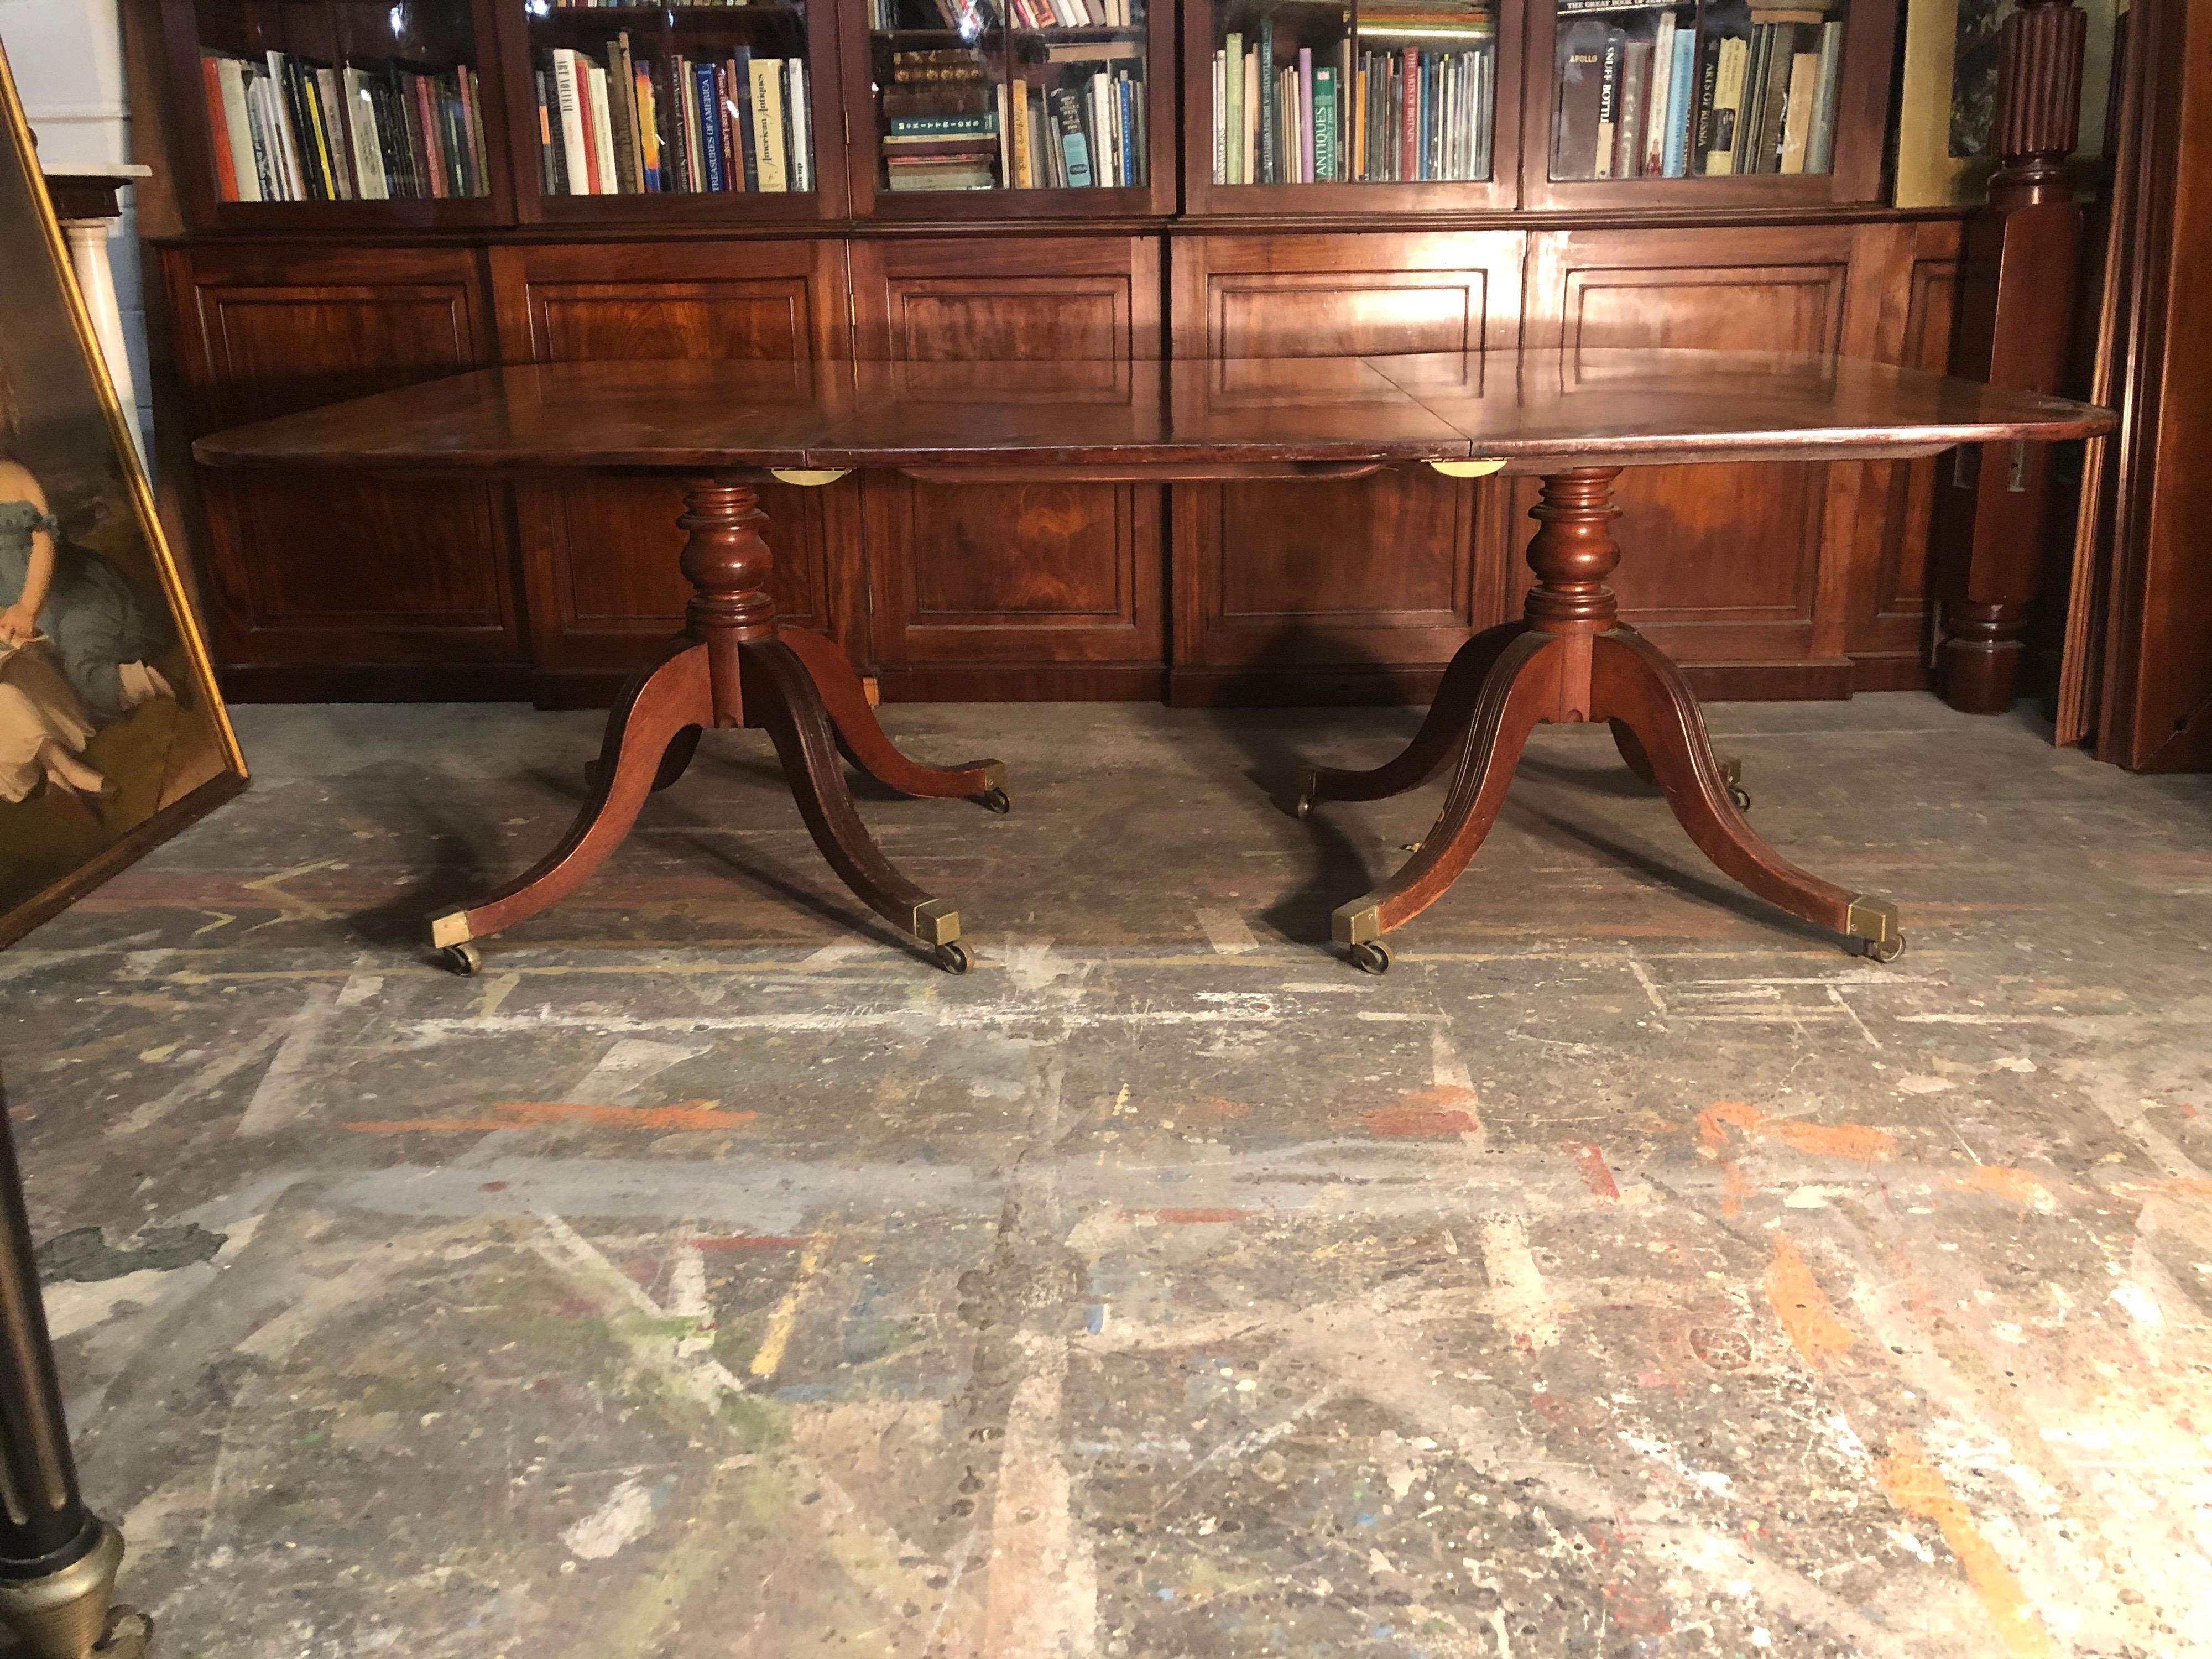 19th Century 19th C. Mahogany Double Pedestal English Regency Dining Table with Brass Casters